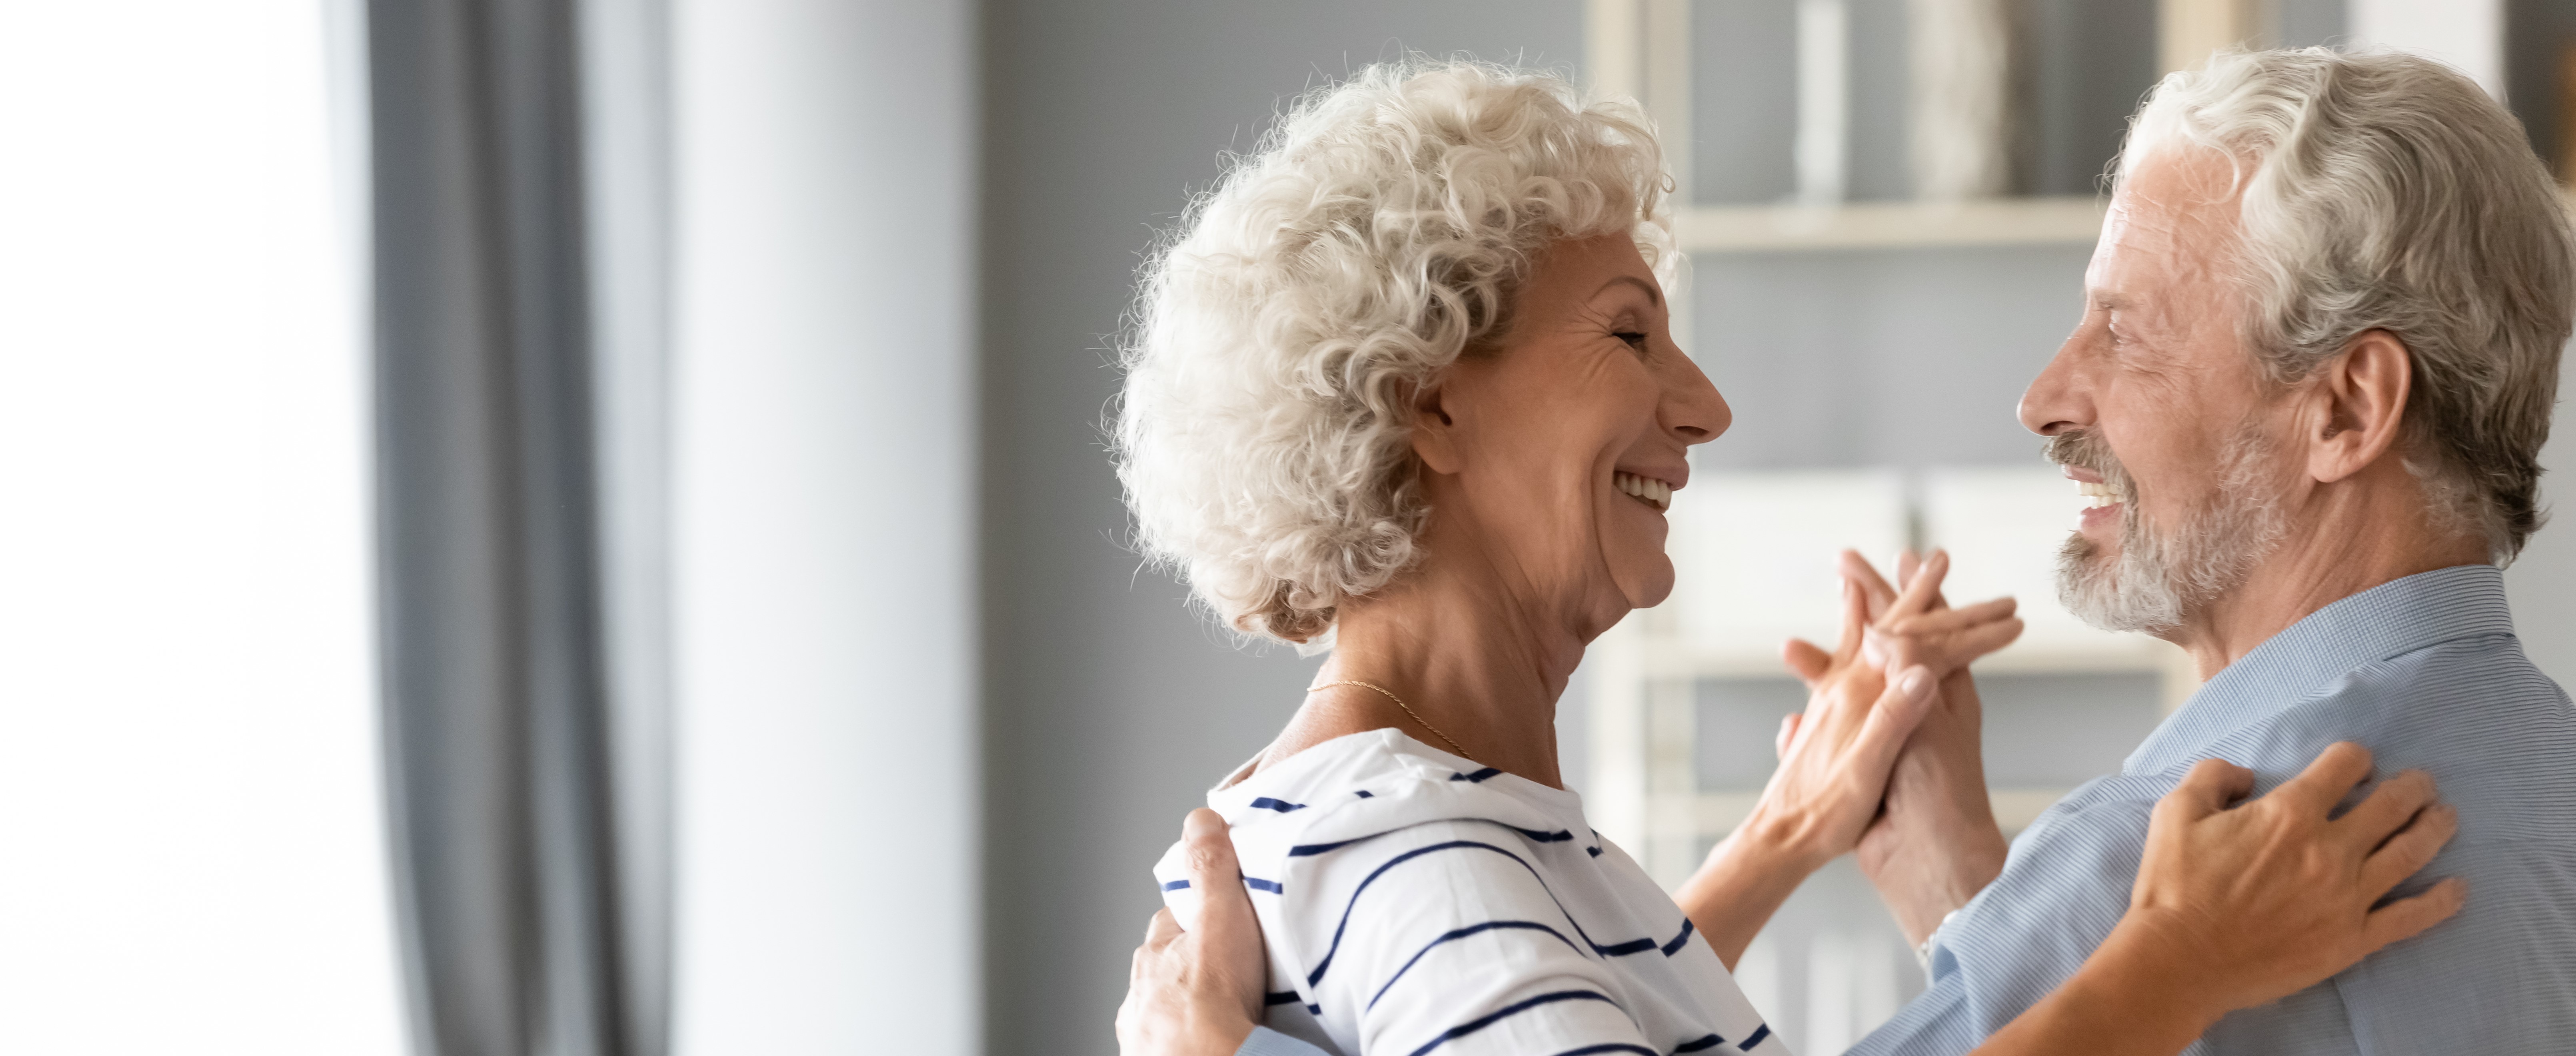 What’s the connection between Alzheimer’s Disease (AD) and falls among senior adults?